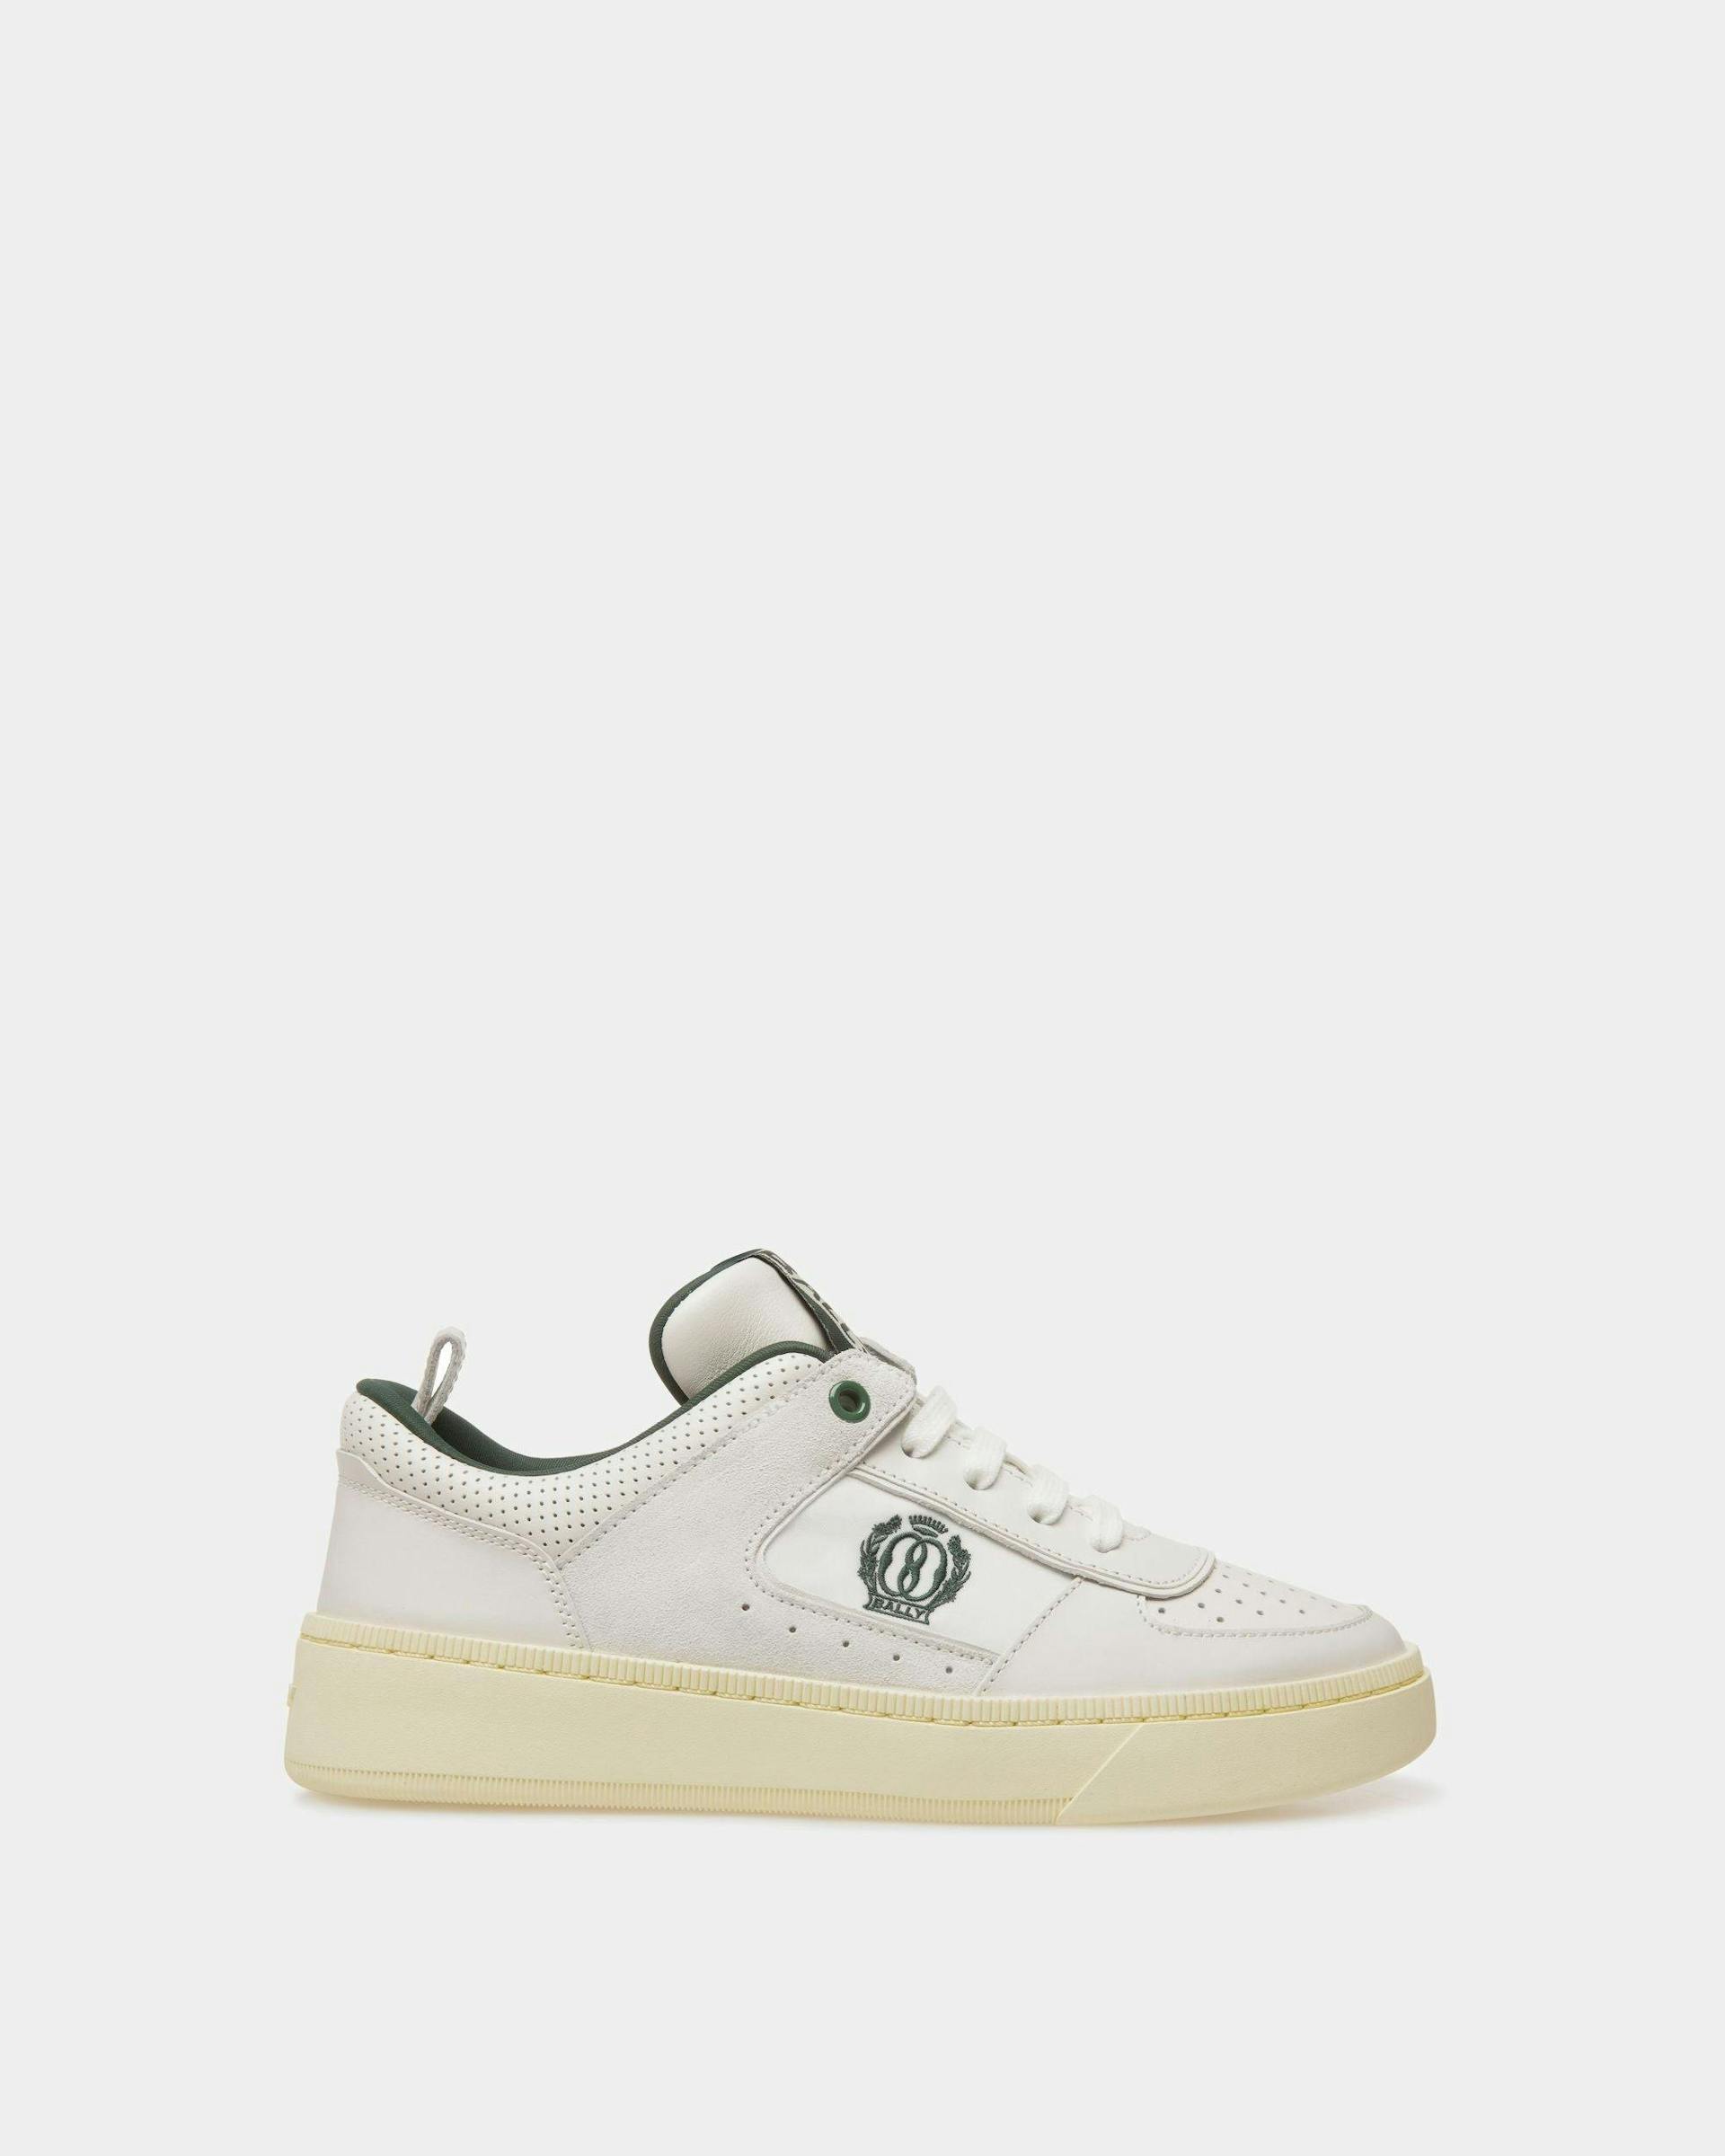 Raise Sneakers In White And Green Leather - Women's - Bally - 01